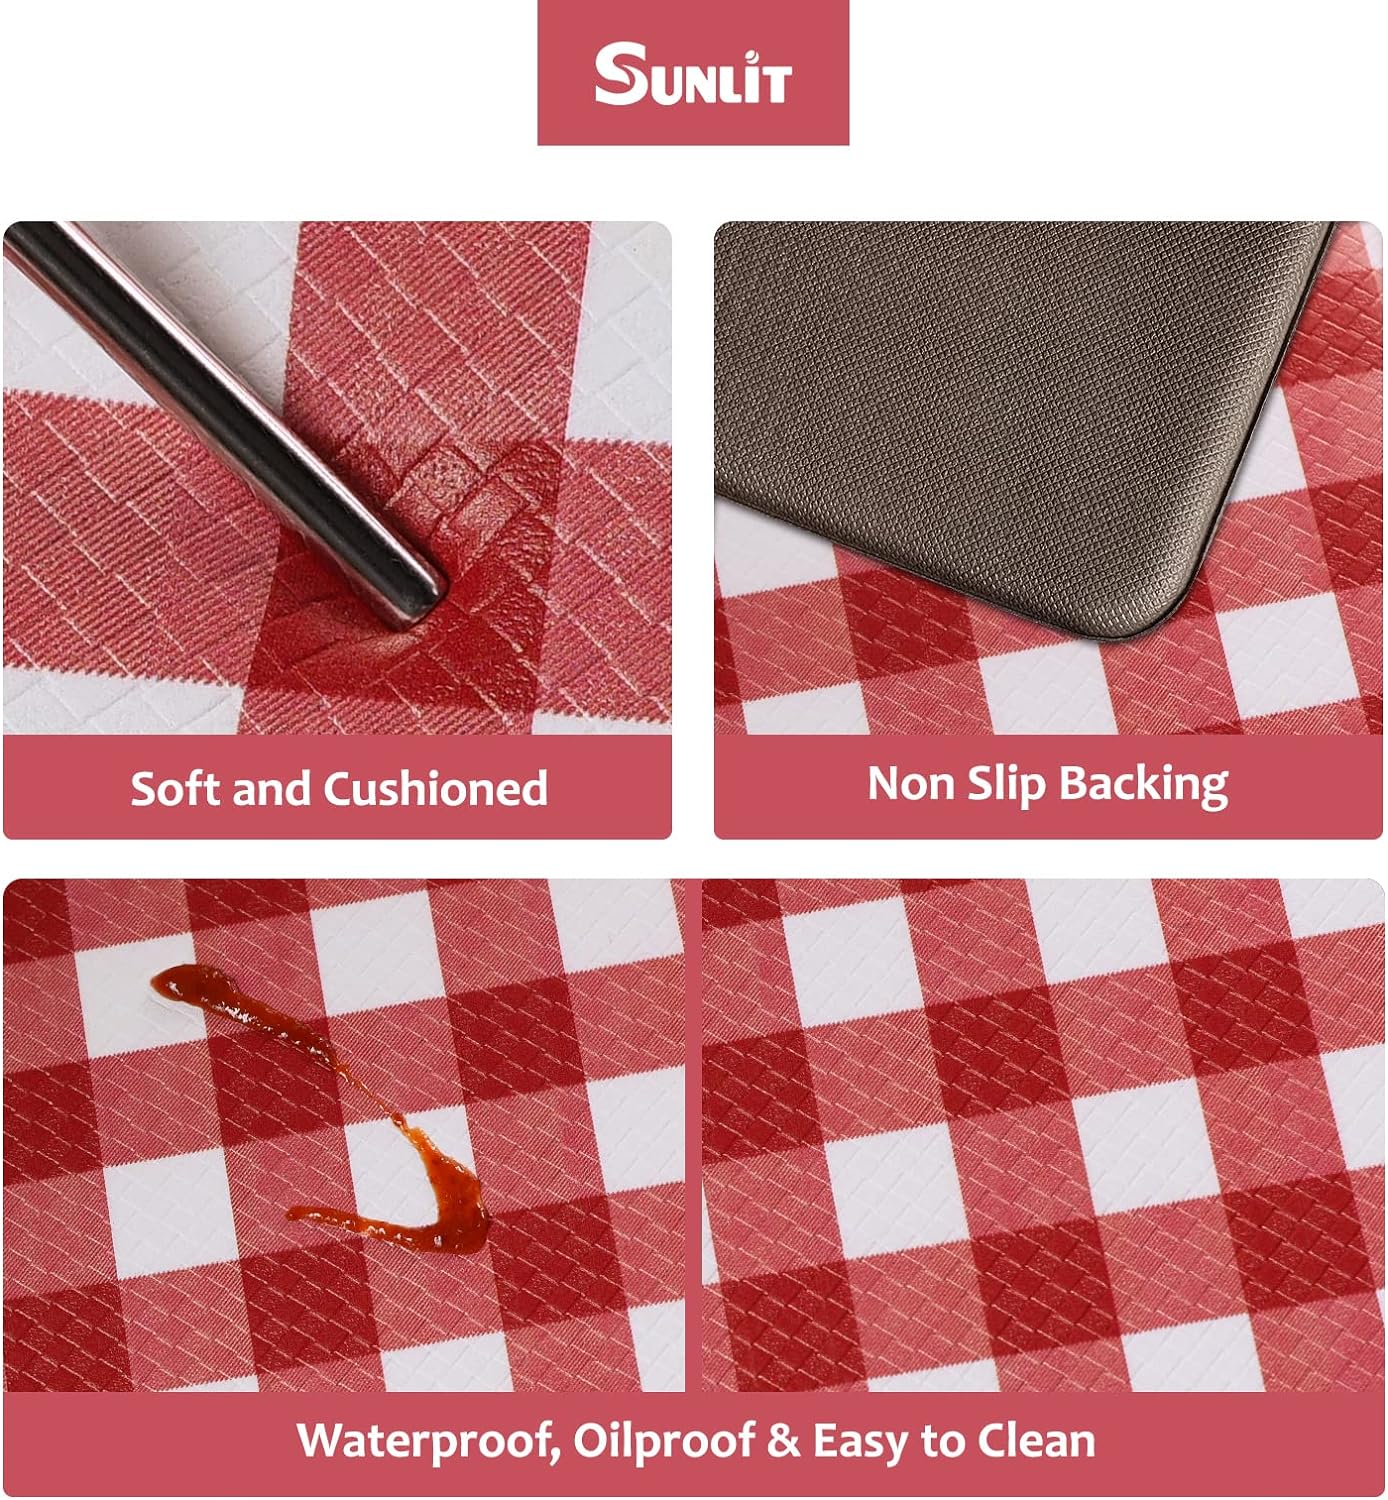 Sunlit Set of 2 Anti Fatigue Kitchen Floor Mat, Non Slip Waterproof Comfort Standing Mat, 0.4 Inch Thick Cushioned Farmhouse Kitchen Rug Runner, White Red Buffalo Check (17"x28"&17"x47")